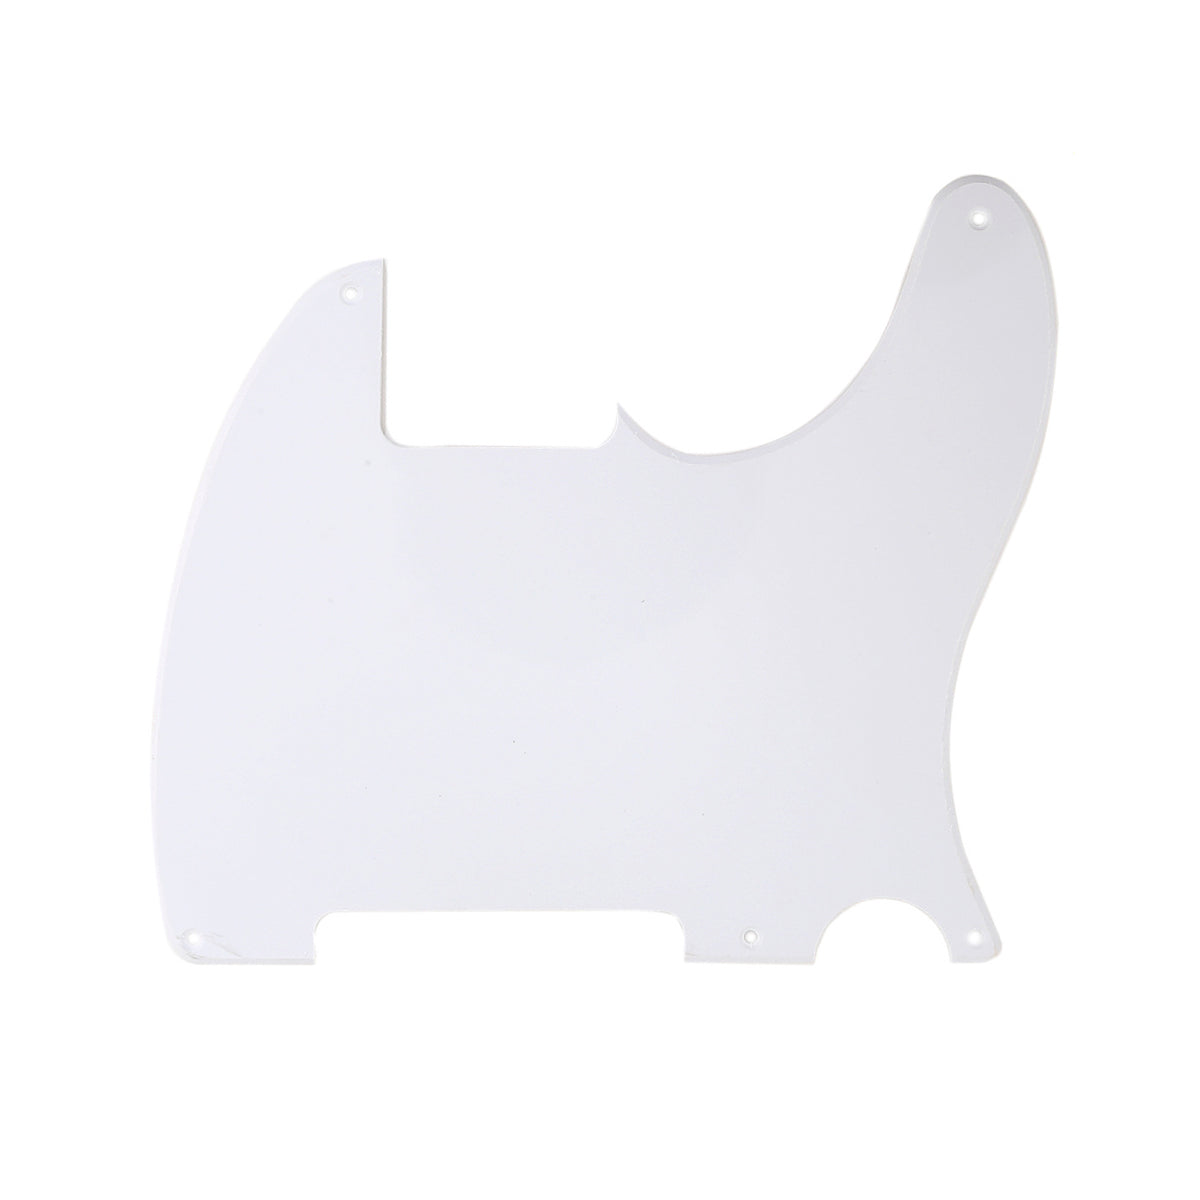 Musiclily 5 Hole Tele Pickguard Blank for Fender USA/Mexican Telecaster Esquire Guitar, 1Ply White